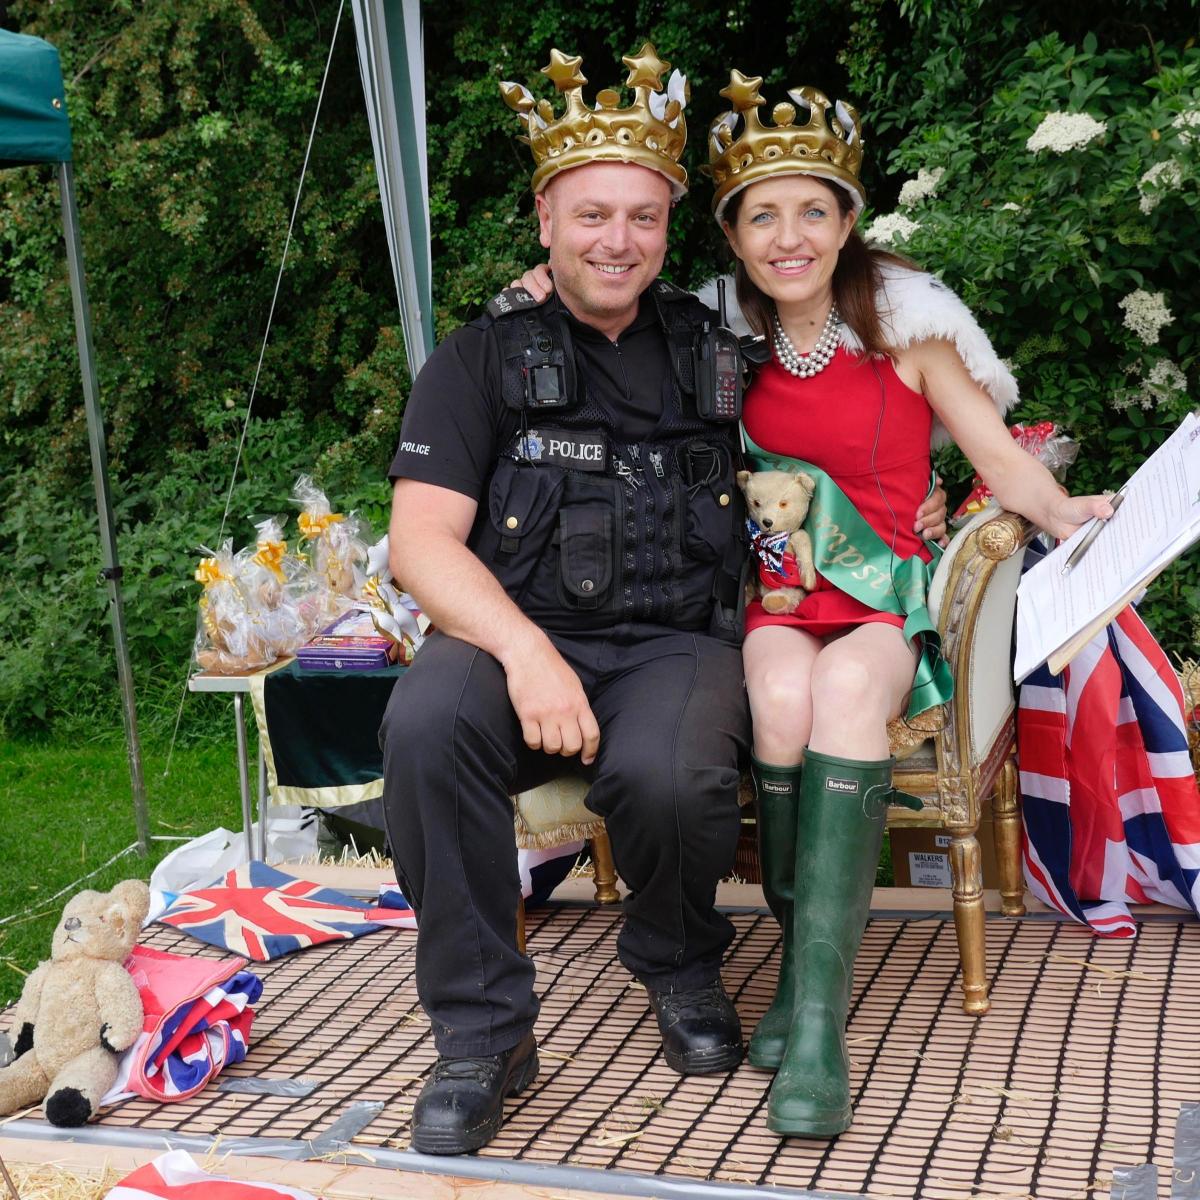 Wheathampstead village celebrates the Queen’s Birthday with a Teddy Bears’ Picnic